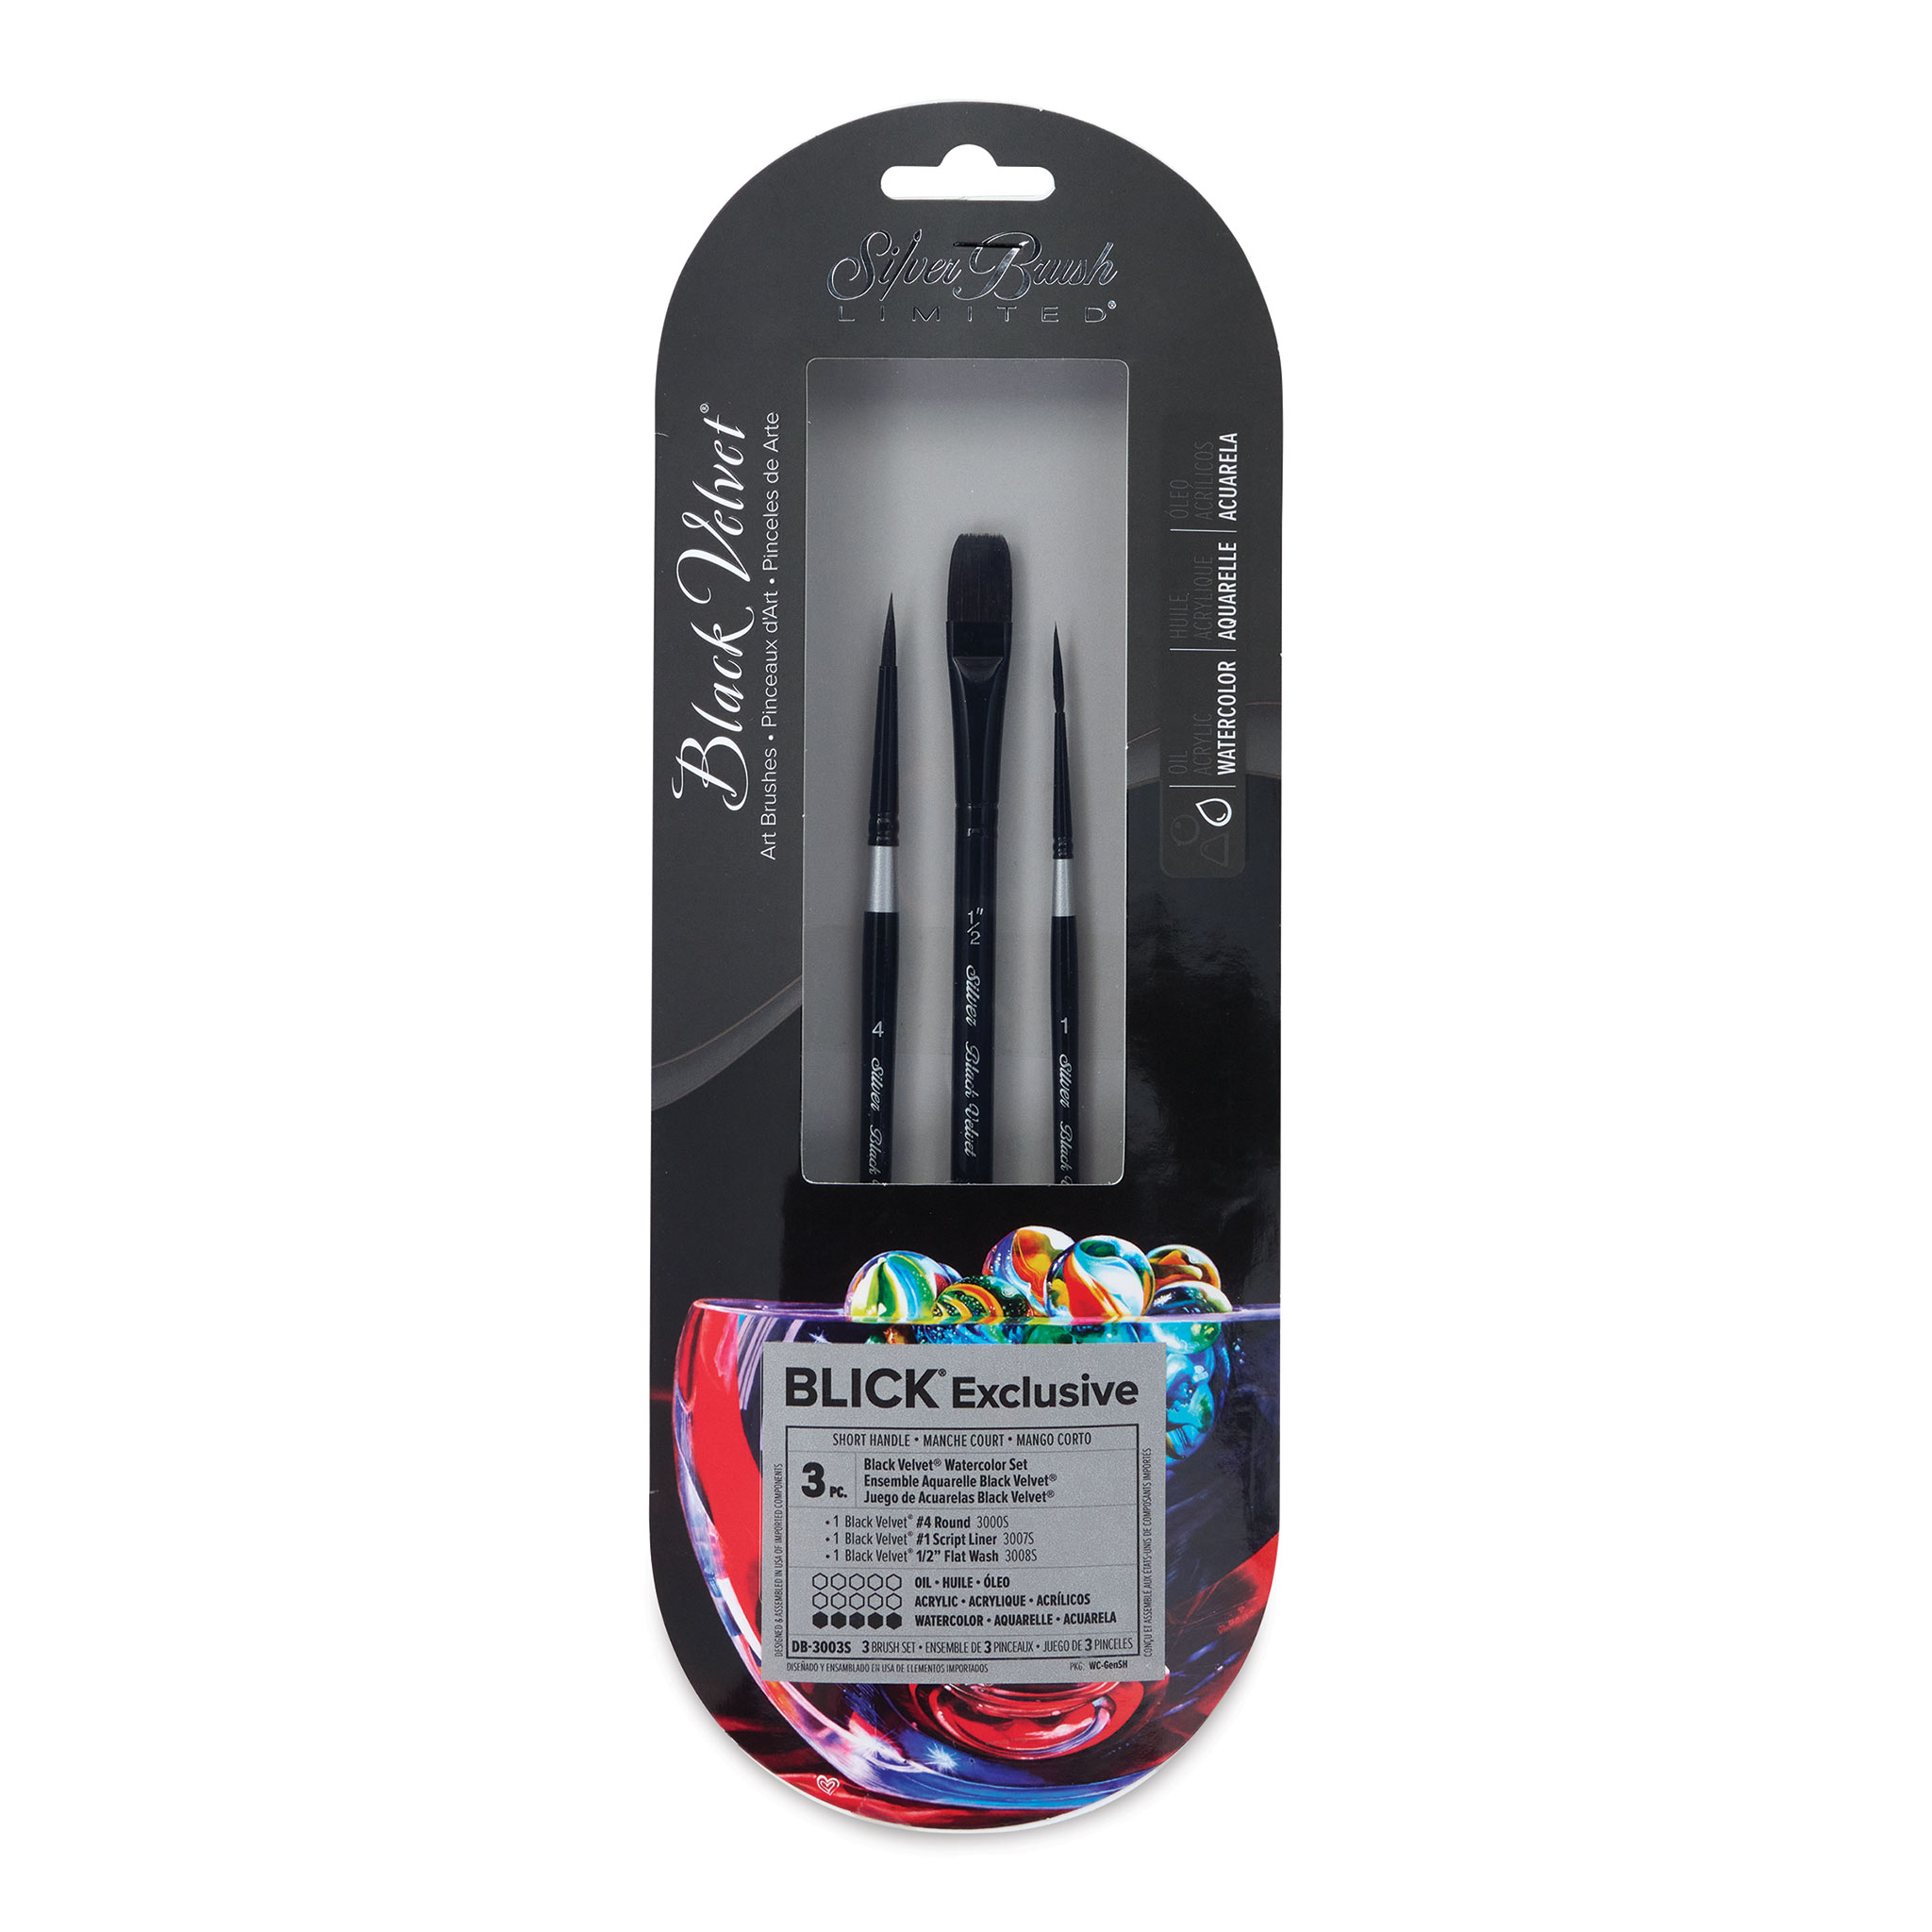 Silver Brush Limited WC-3000S Black Velvet Master Watercolor Set, Set of 3  Brushes, Script Liner Size 1, Oval Wash Size 3/4 Inch, and Round Size 8